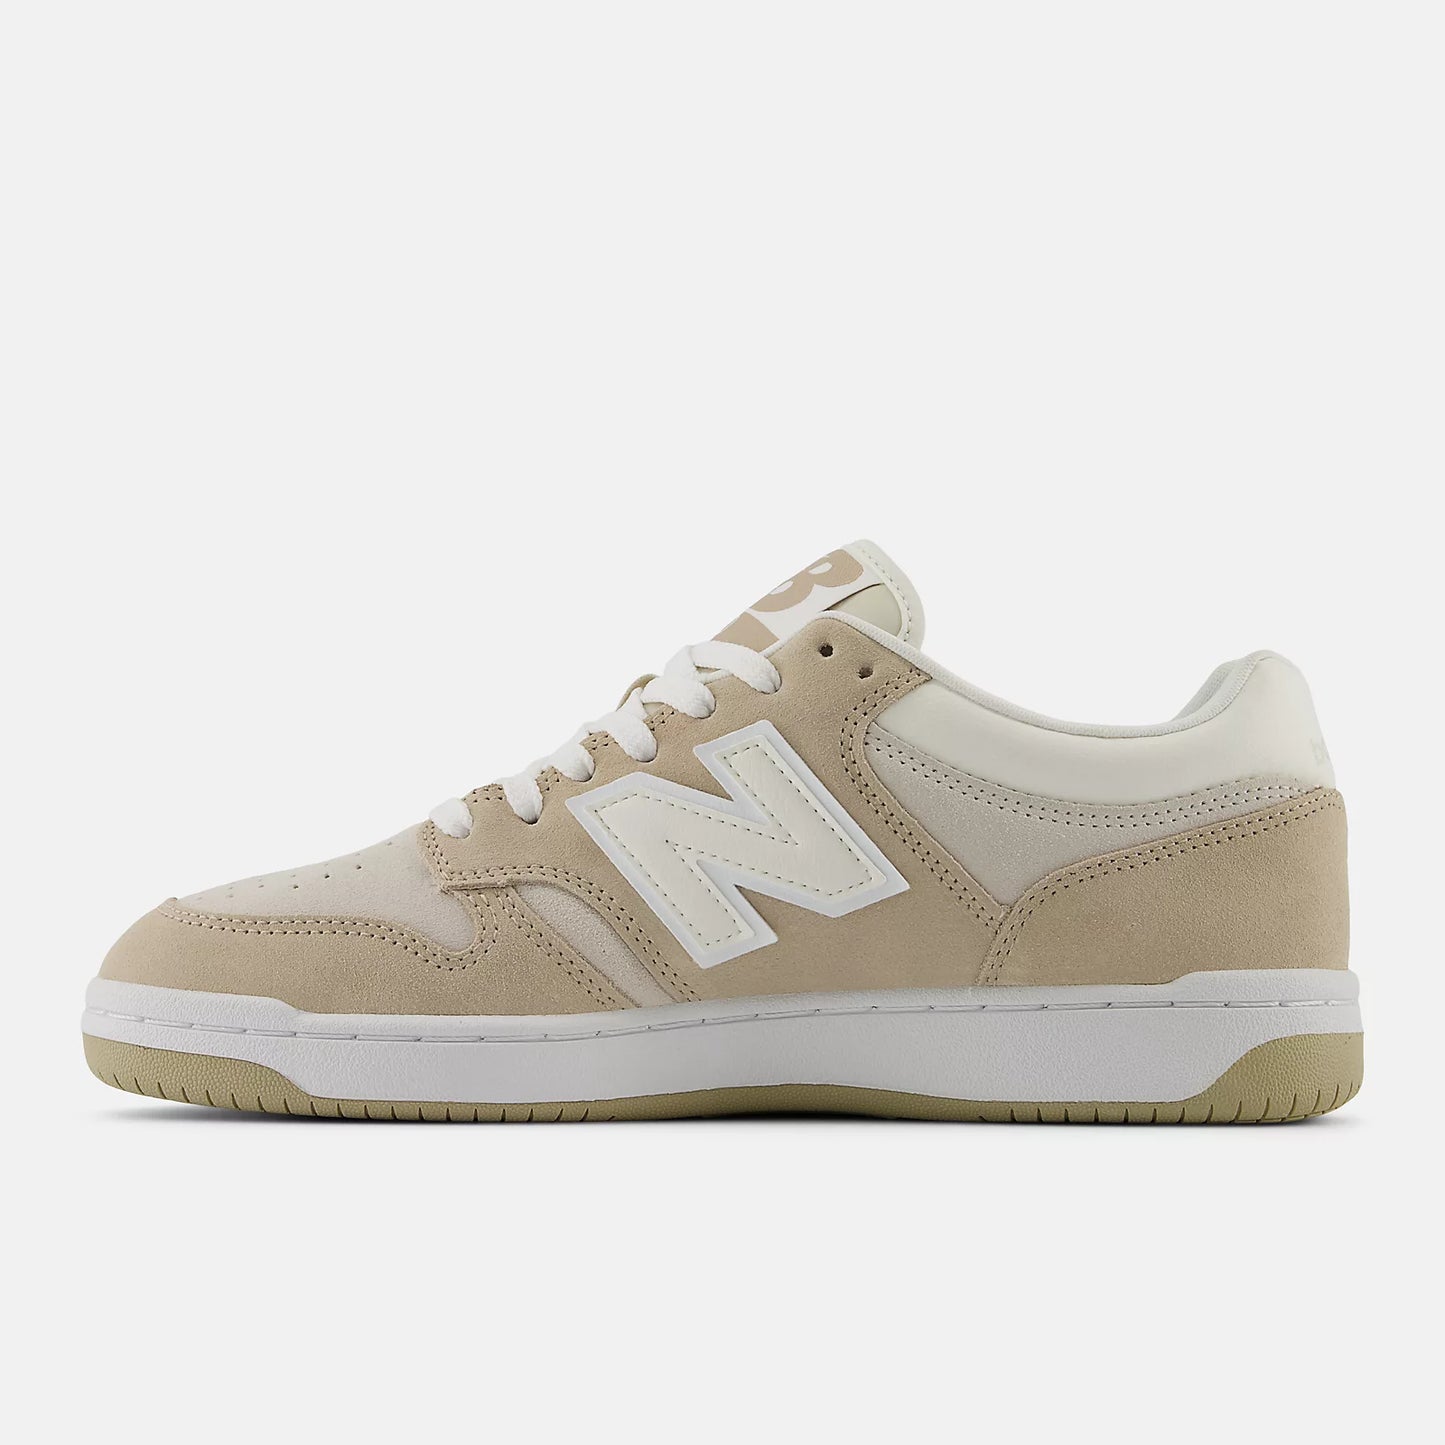 NEW BALANCE | SNEAKERS HOMBRE | 480 MINDFUL GREY | BEIGE